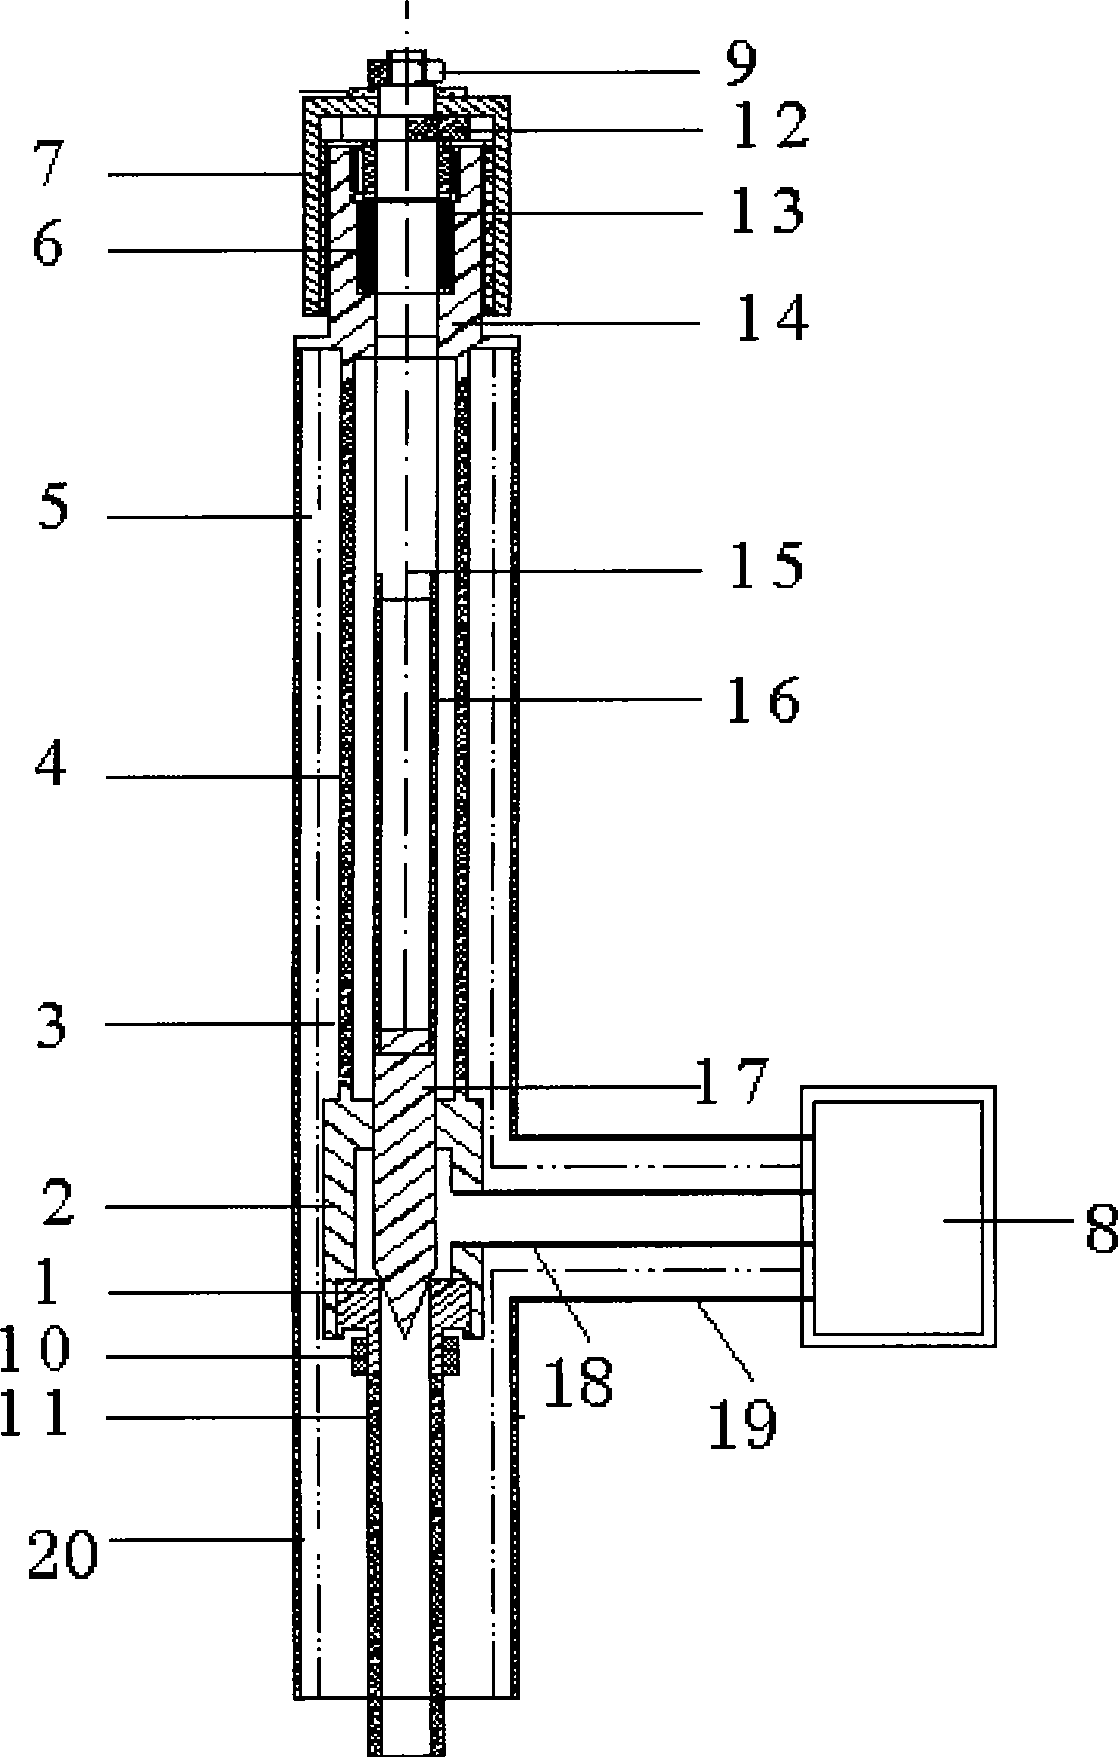 Flow control valve of large-sized low temperature device